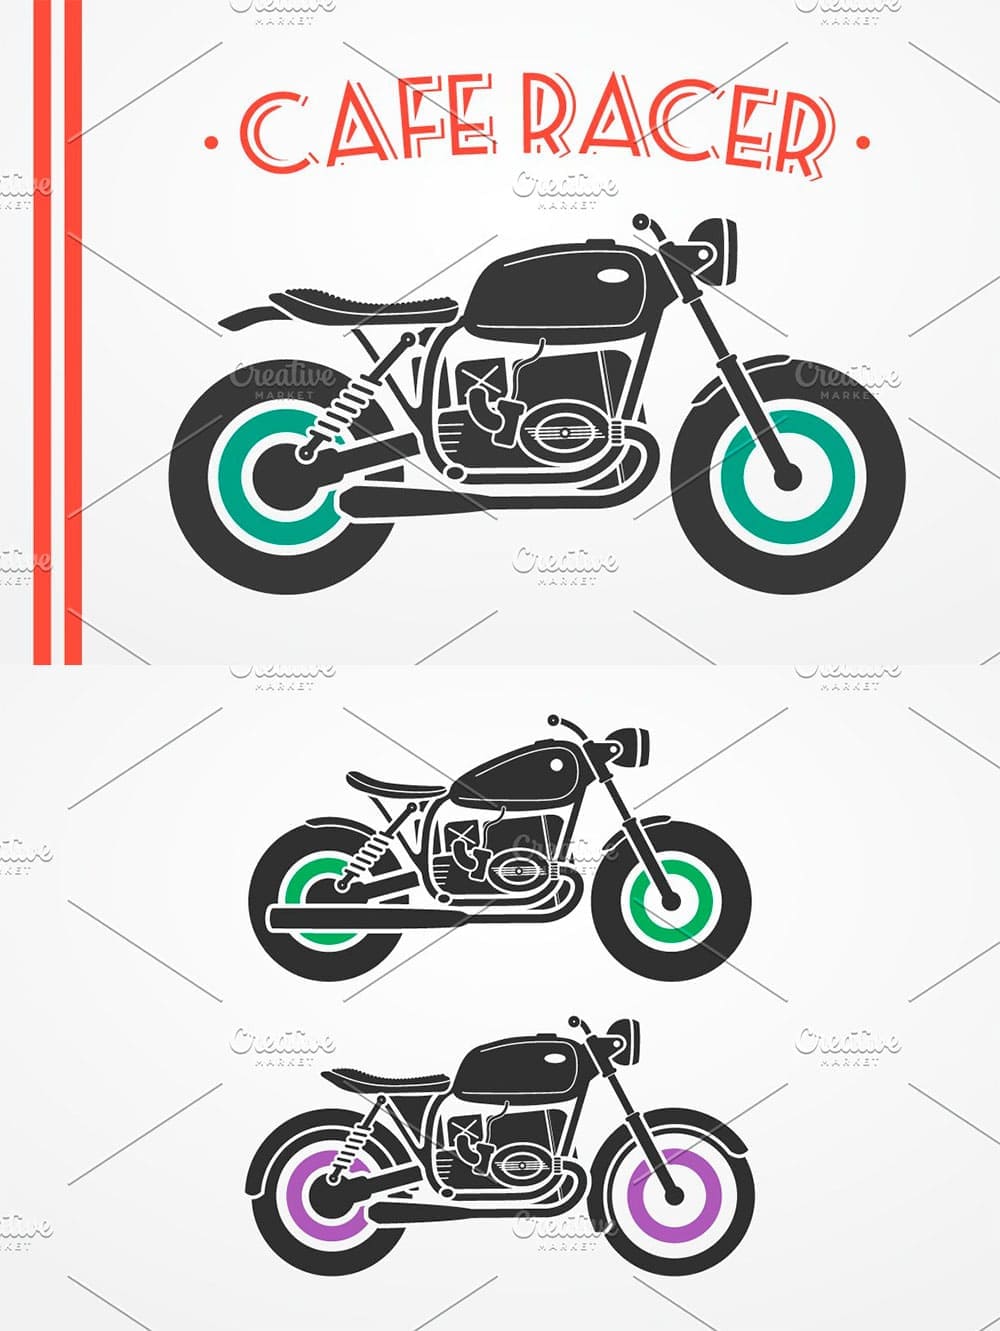 Cafe racer motorcycle set, picture for pinterest.